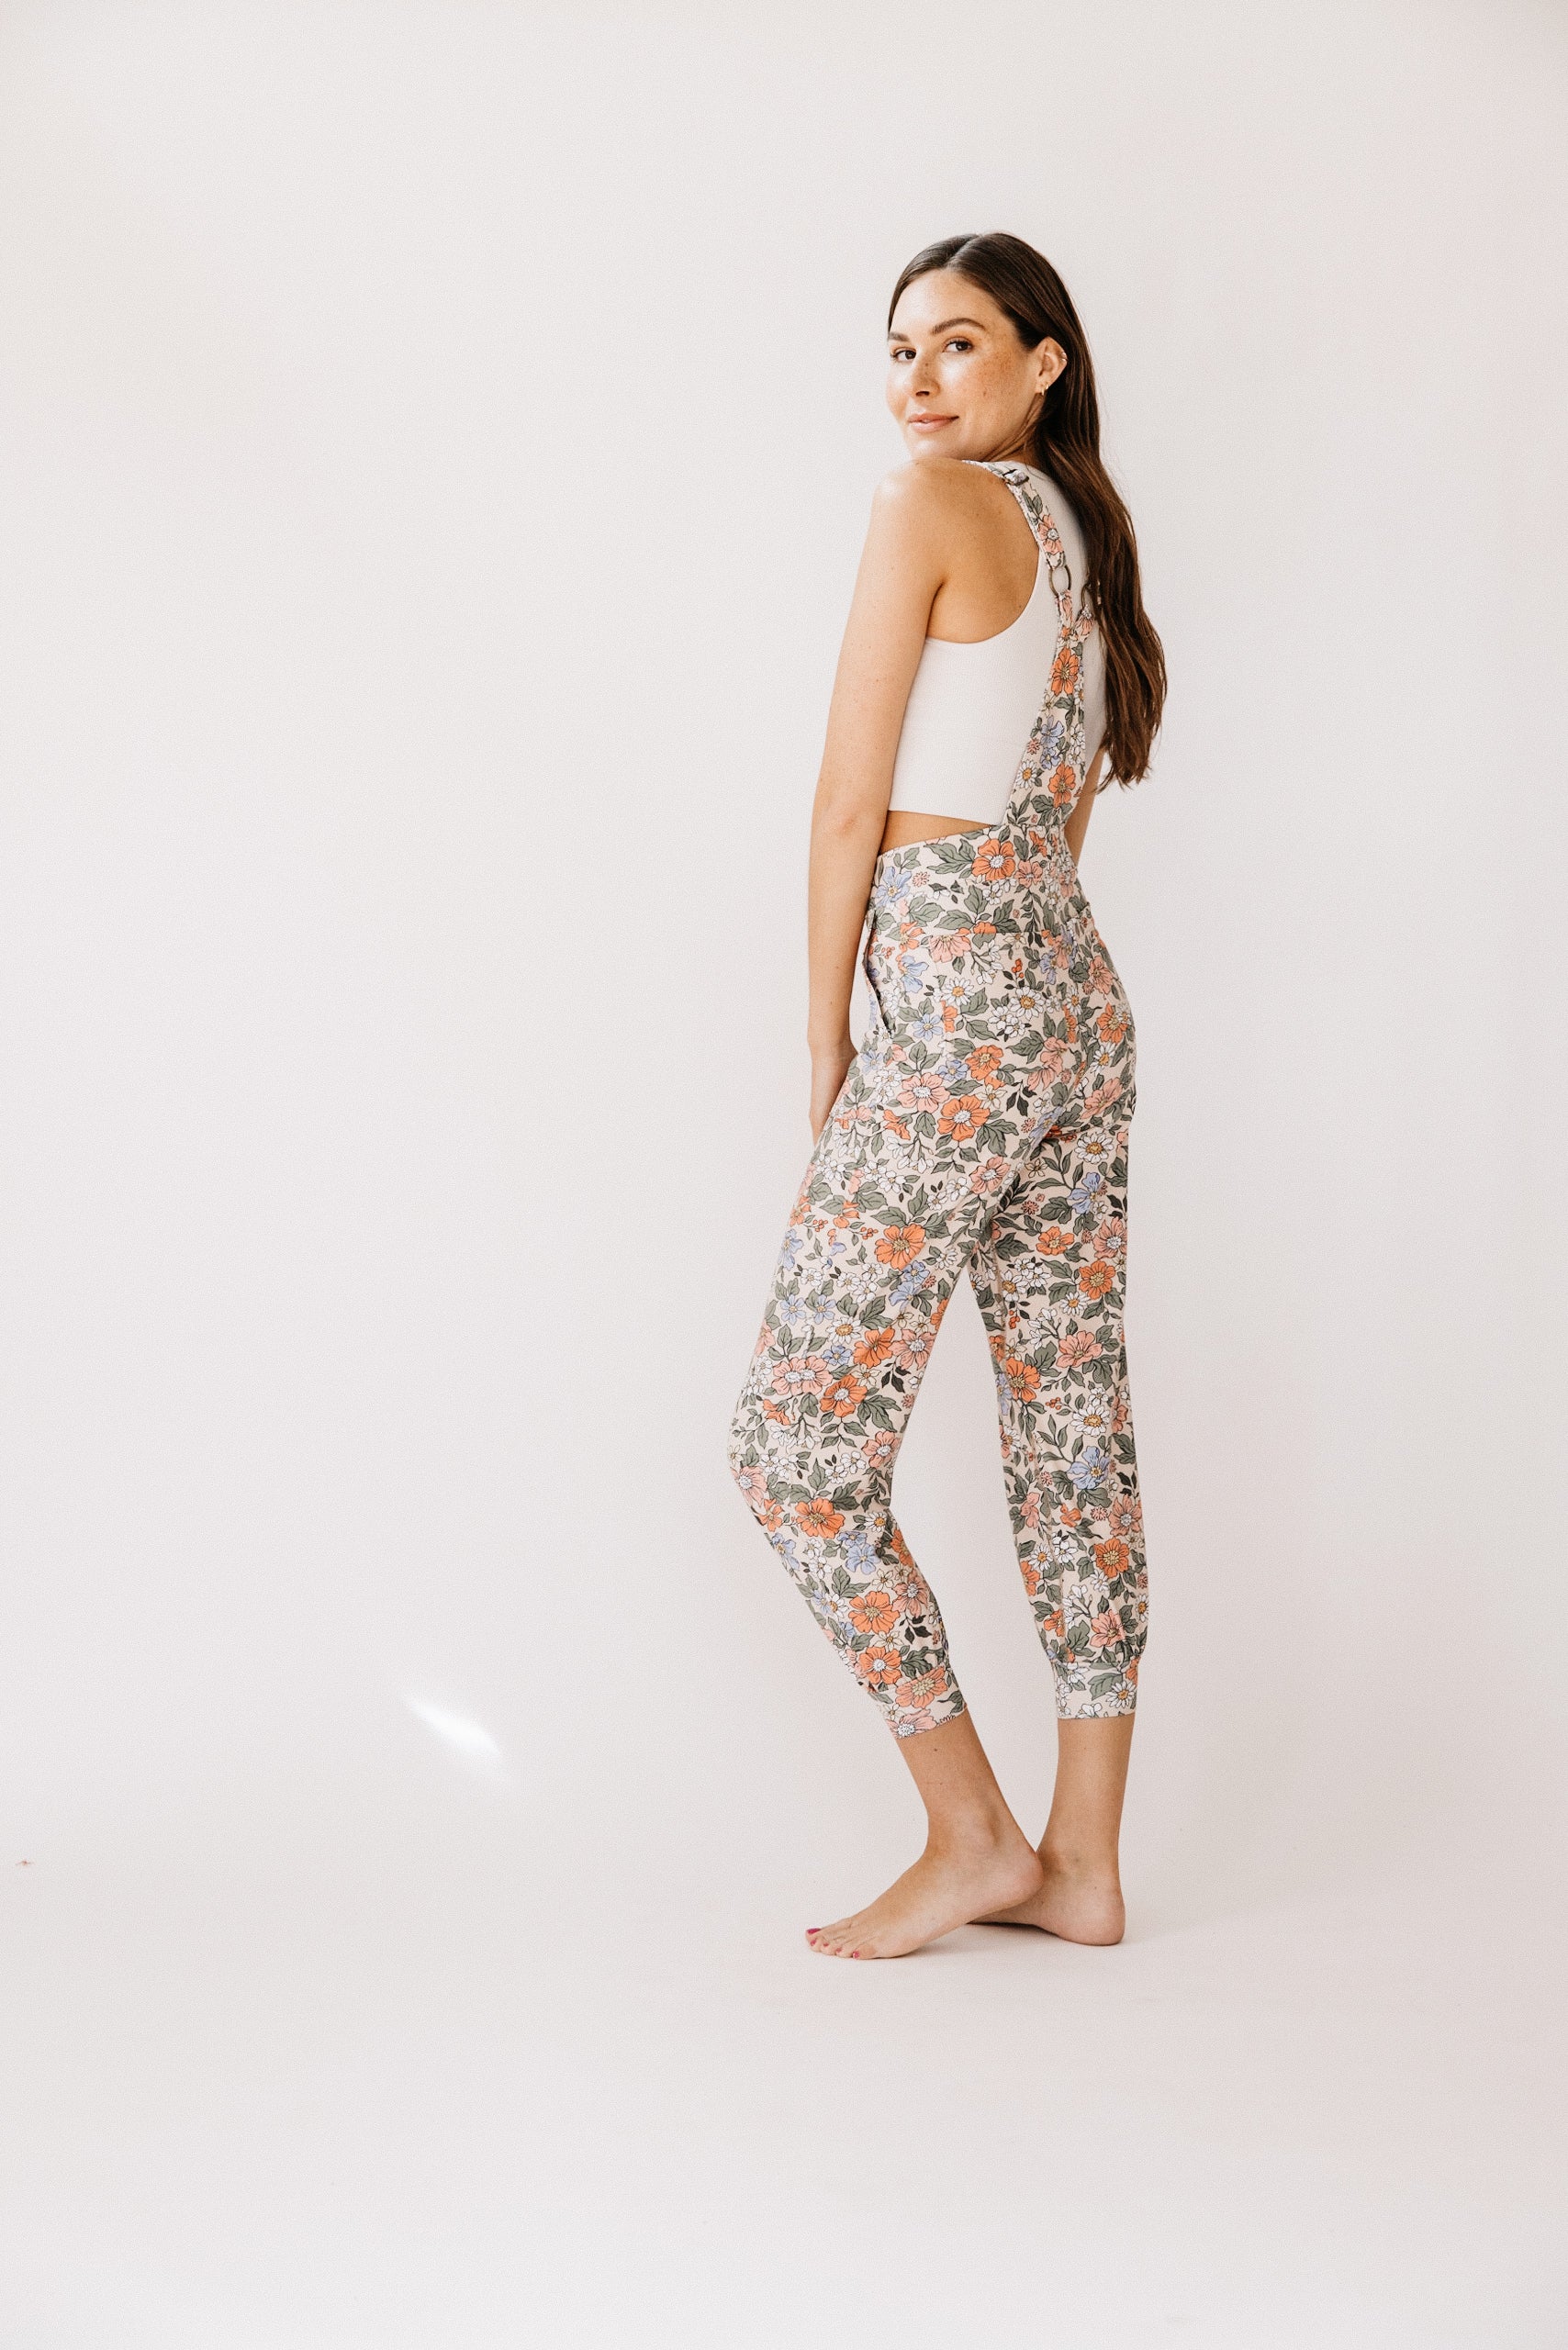 Buy ALL WAYS YOU Floral Printed Sweetheart Neck Waist Tie Ups Basic Jumpsuit  - Jumpsuit for Women 24676520 | Myntra